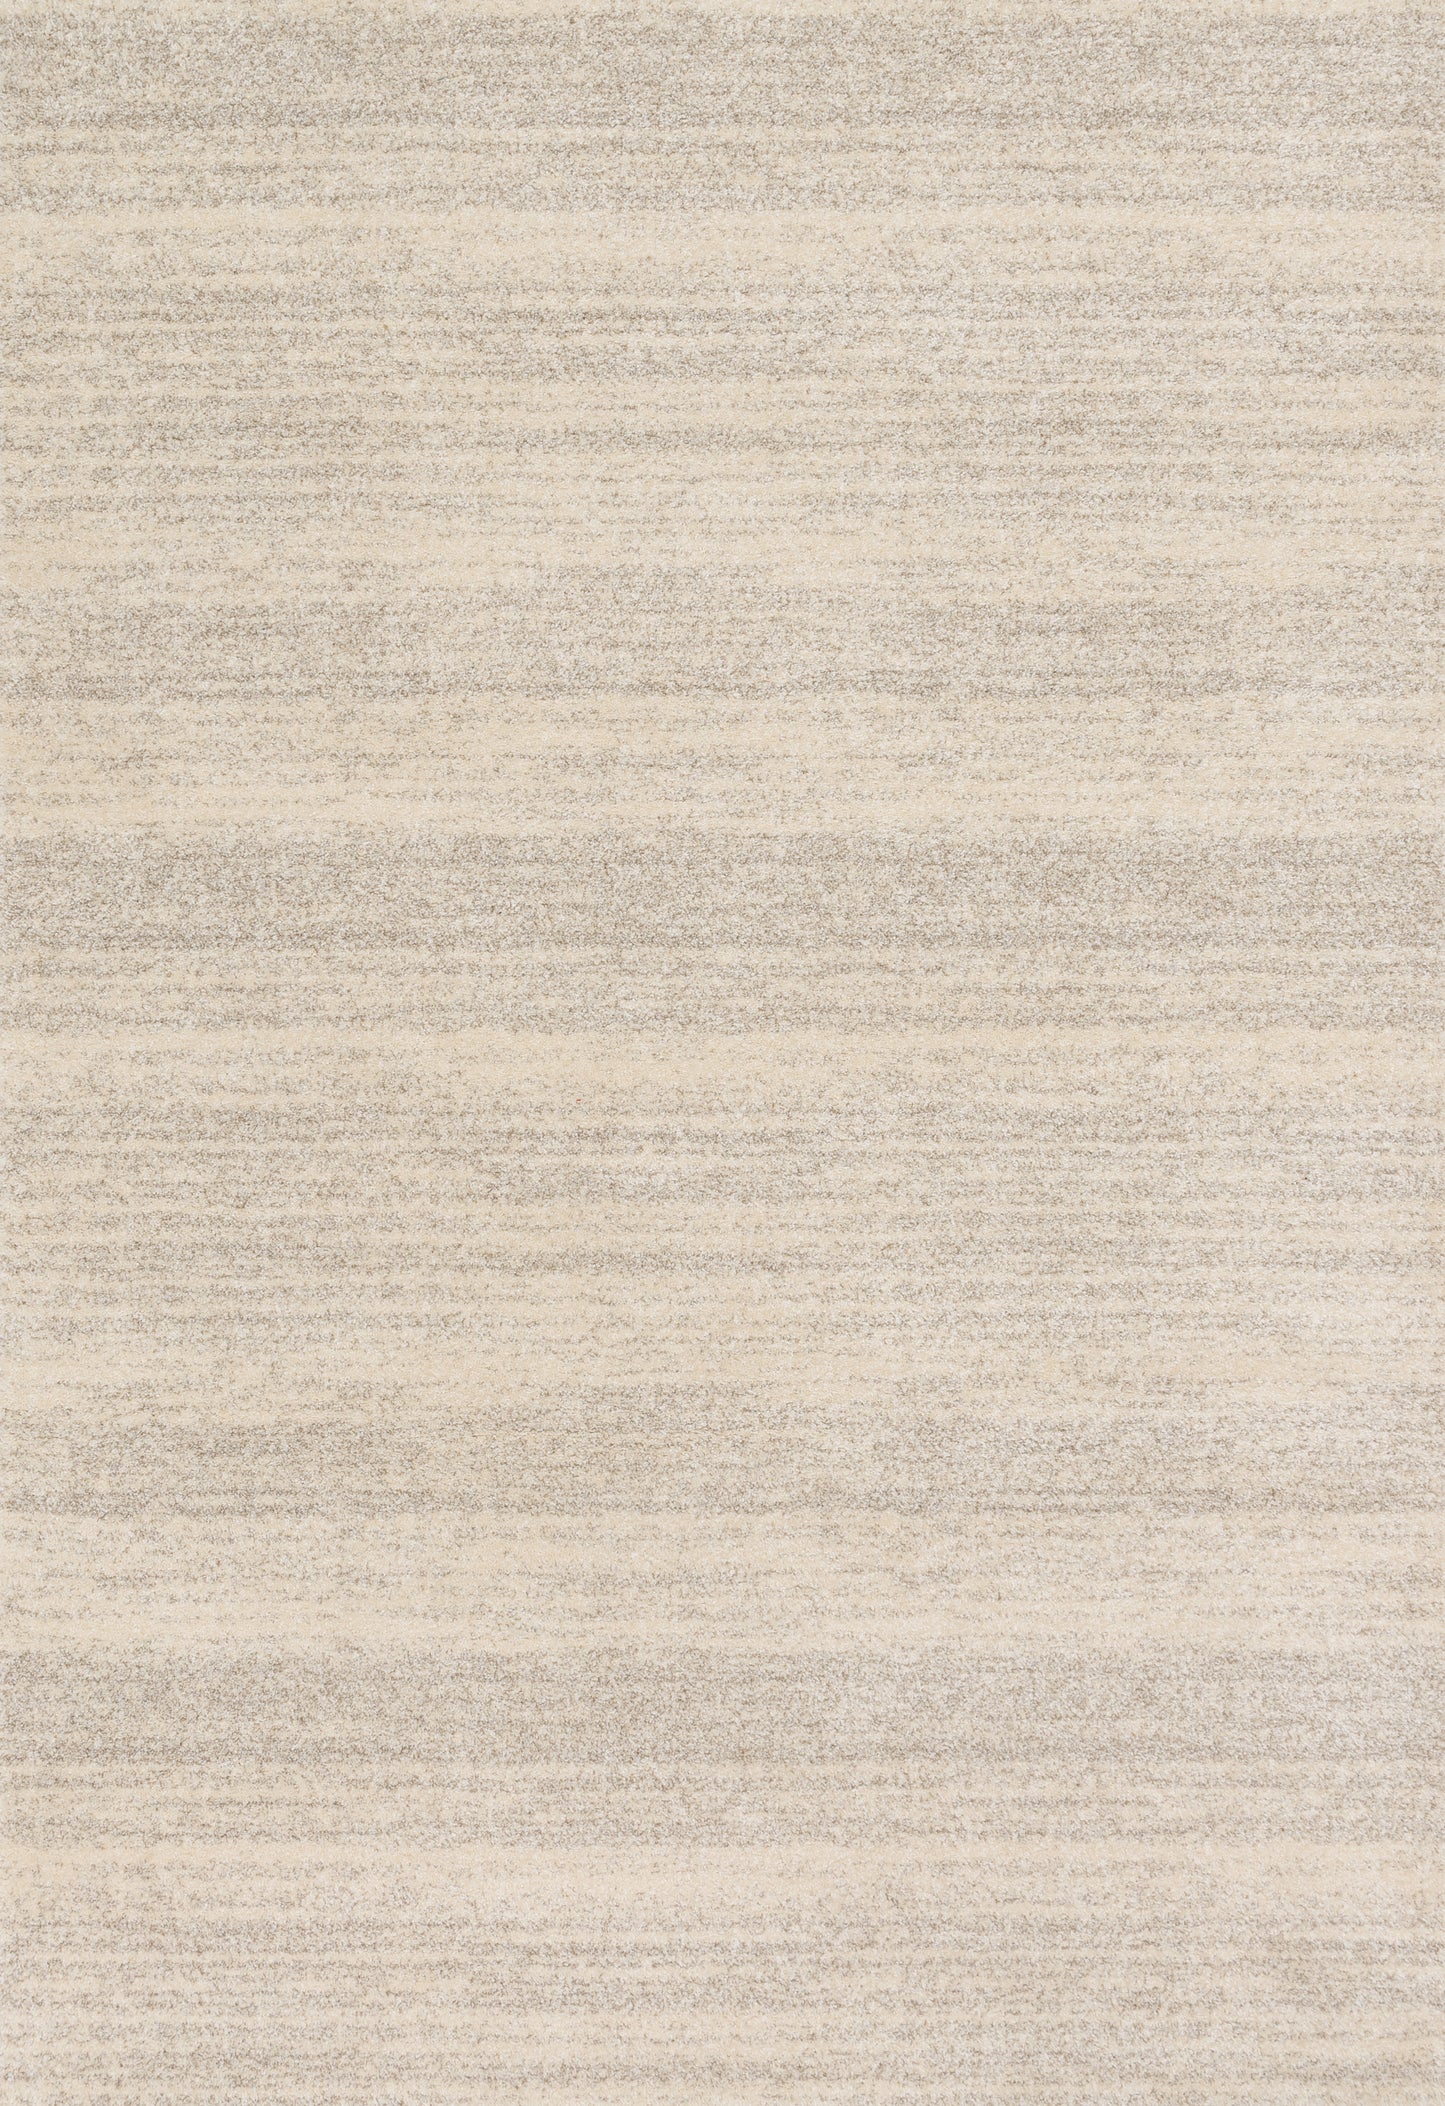 A picture of Loloi's Emory rug, in style EB-04, color Granite